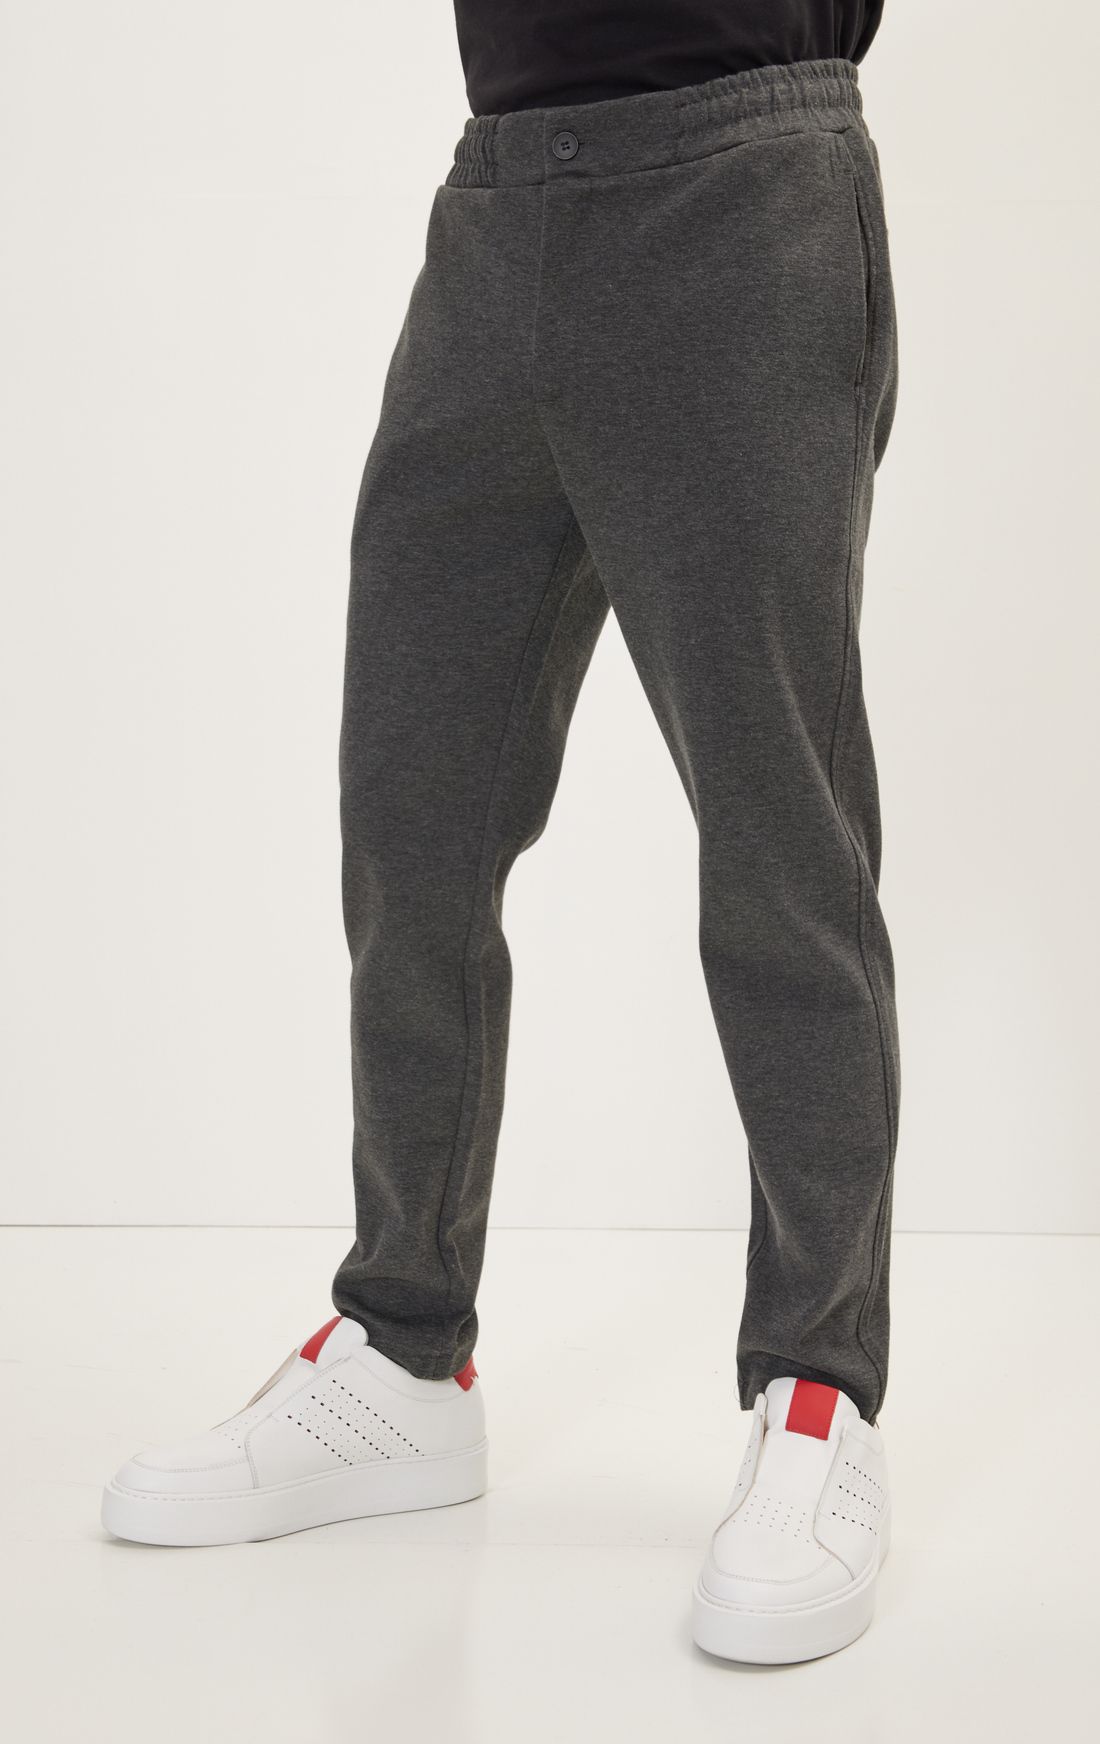 N° 2699-ANTHRACITE JOGGER PANTS